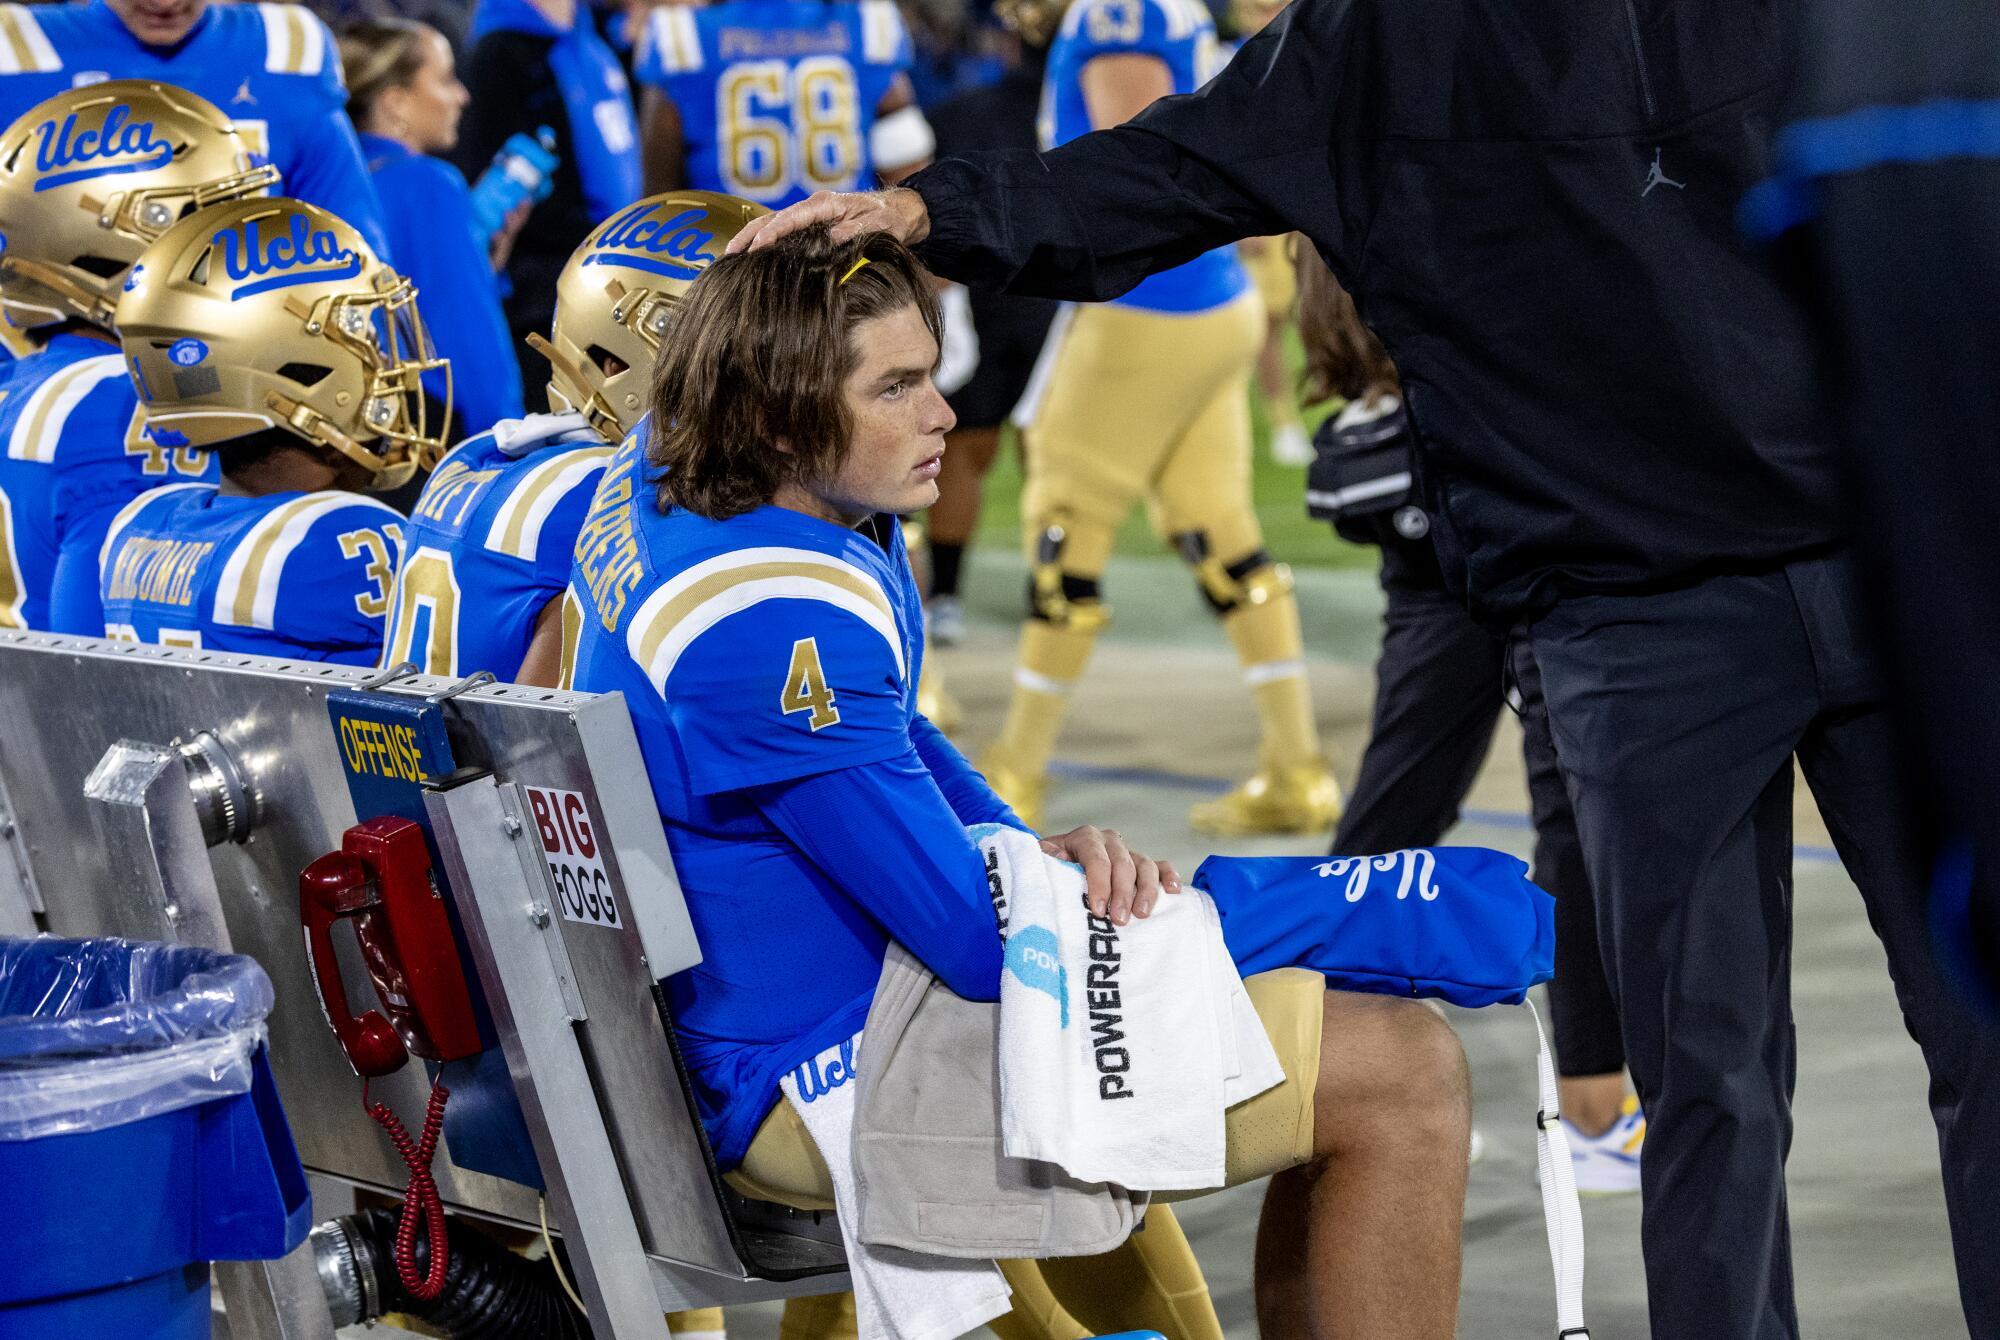 UCLA quarterback Ethan Garbers sits on the bench with a towel on his arm after he was knocked out of the game by Cal